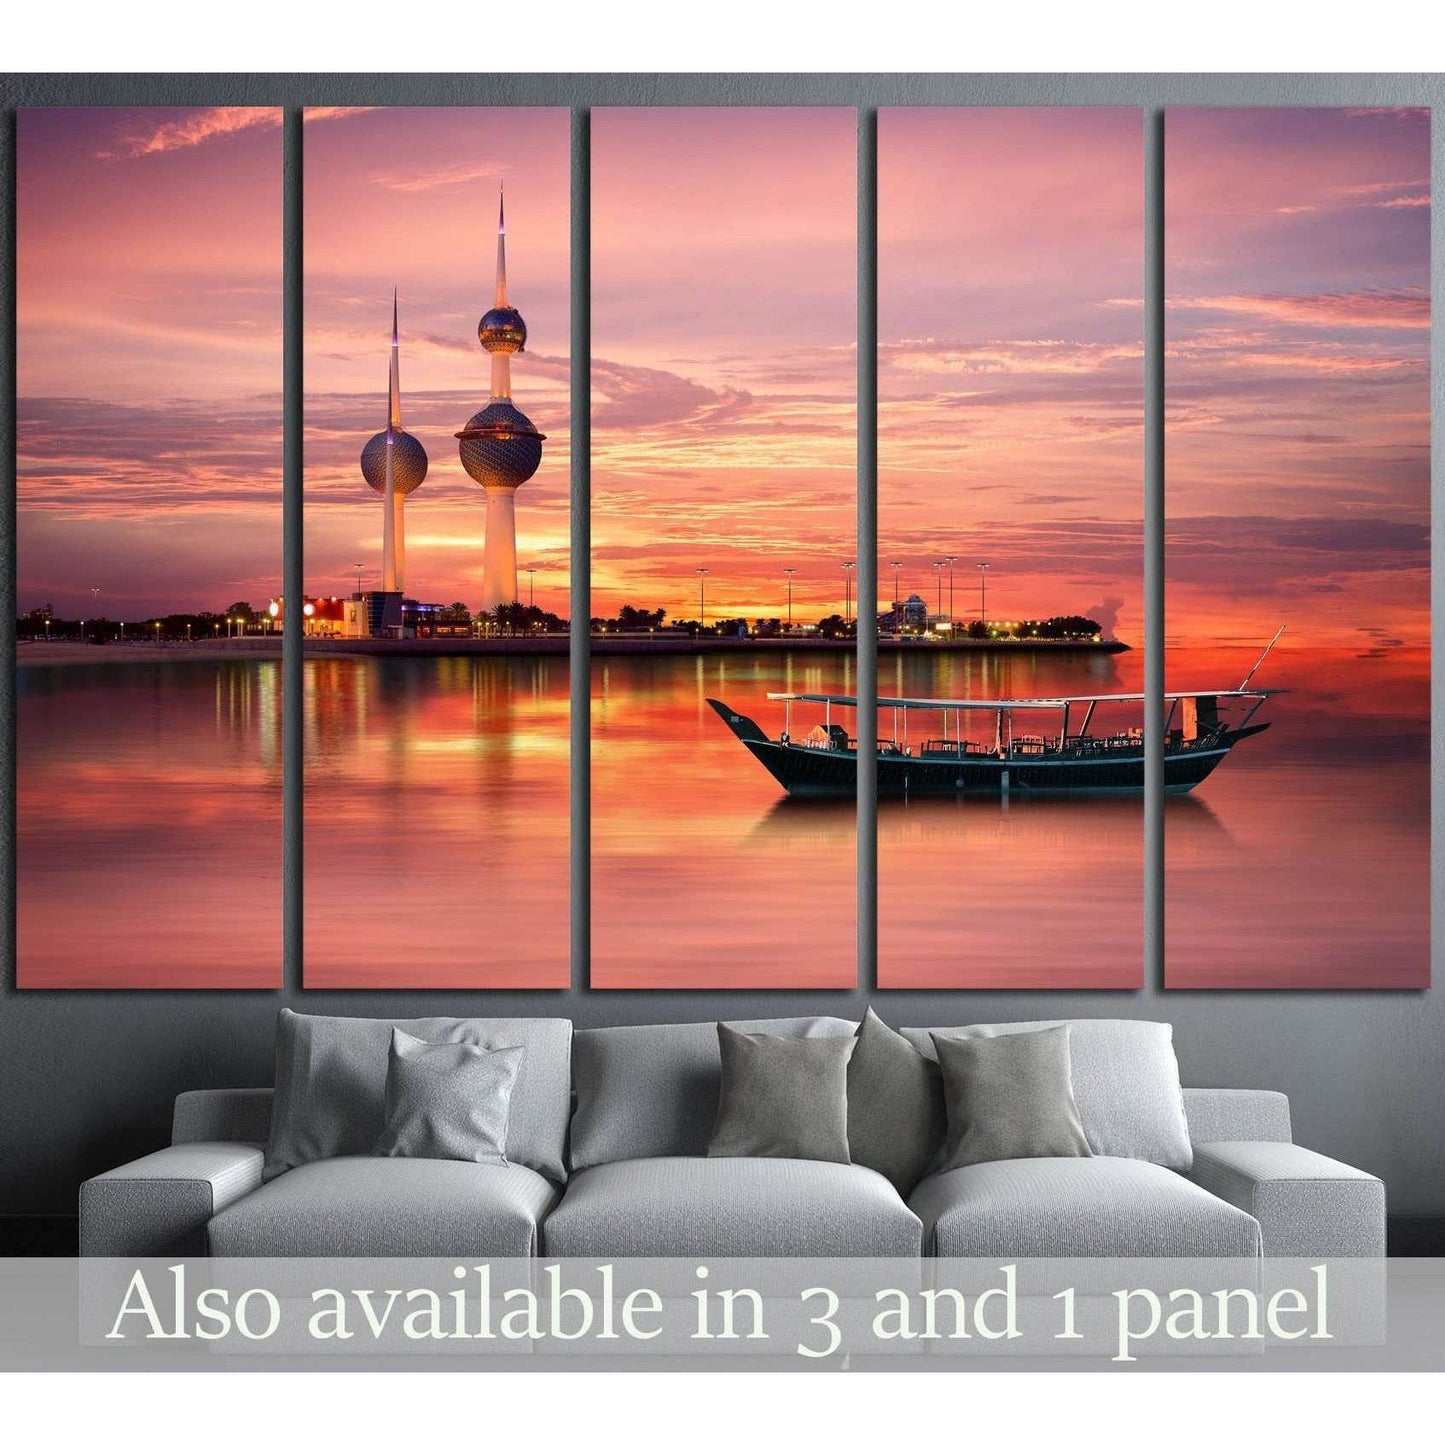 Serene Sunset Over Kuwait Towers Canvas for Office WallsThis canvas print showcases a serene twilight scene with the iconic Kuwait Towers silhouetted against a radiant sunset sky, complemented by a traditional dhow boat on the water's calm surface. This p